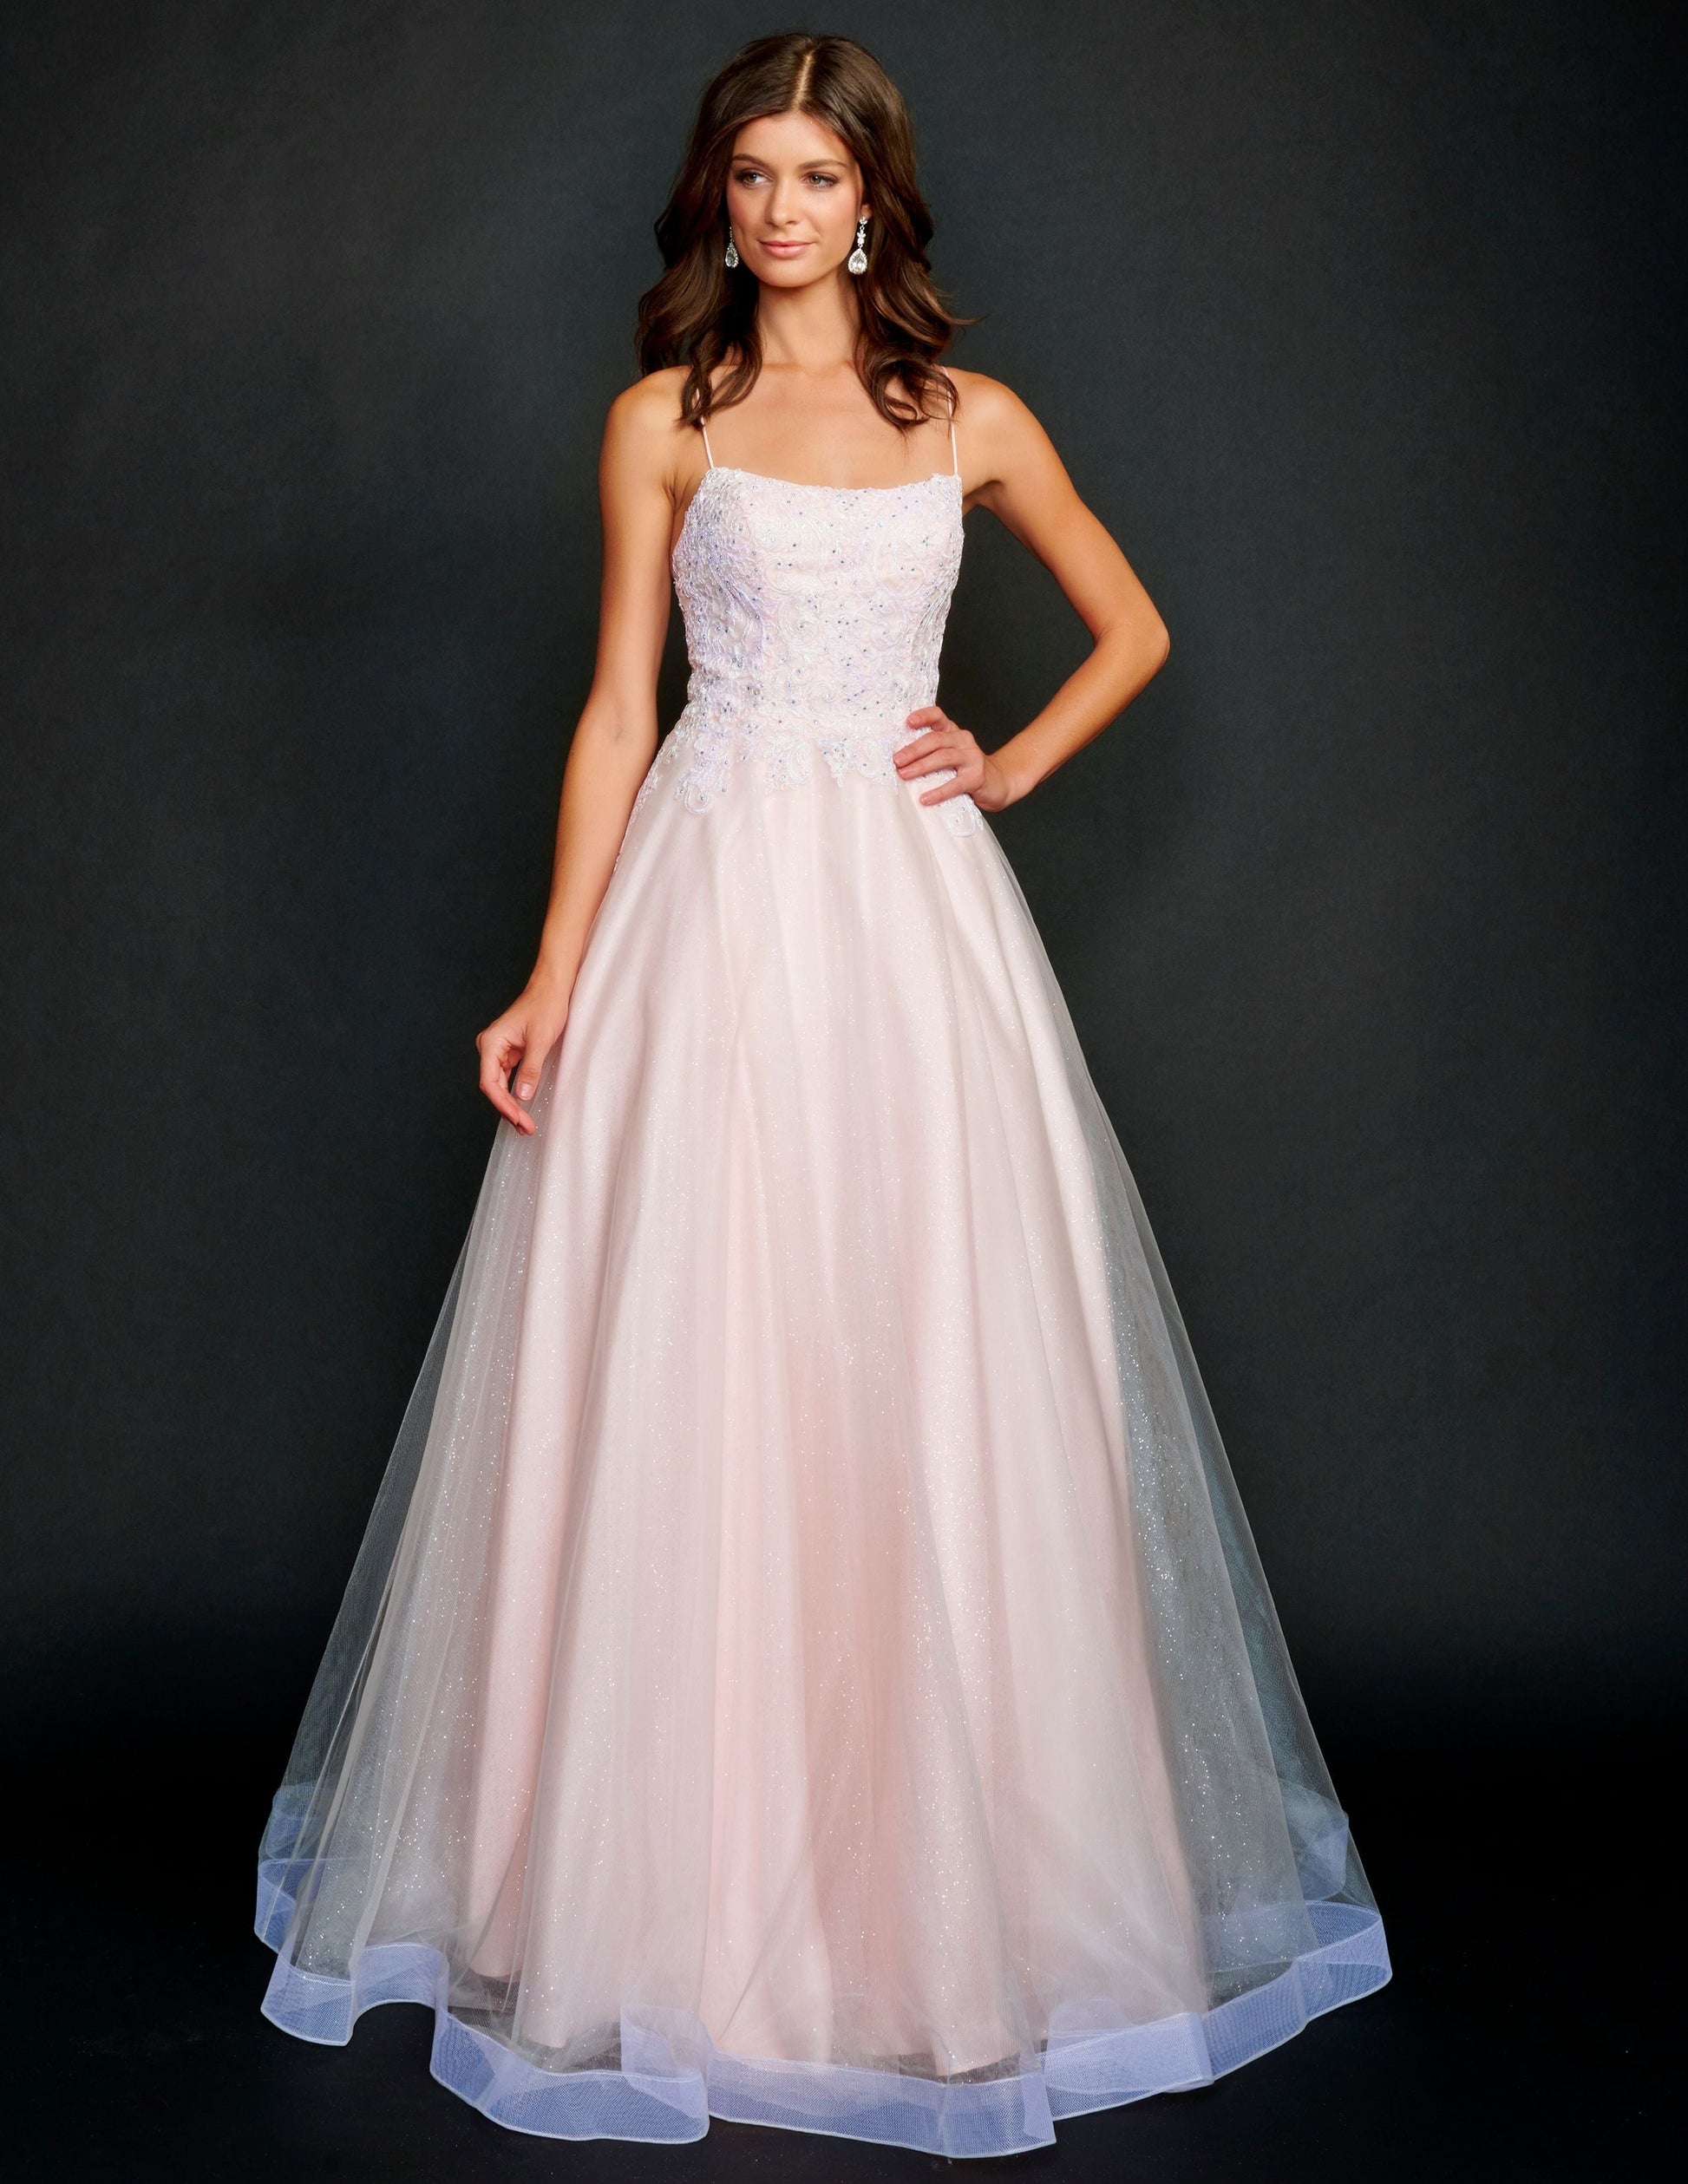 Nina Canacci 3203 Long shimmering lace Ballgown Prom Dress Pageant Gown Sheer shimmer embellished lace back with corset. Glitter tulle ballgown skirt  Available Size- 2, 8, 10, 14  Available Color- Light Pink